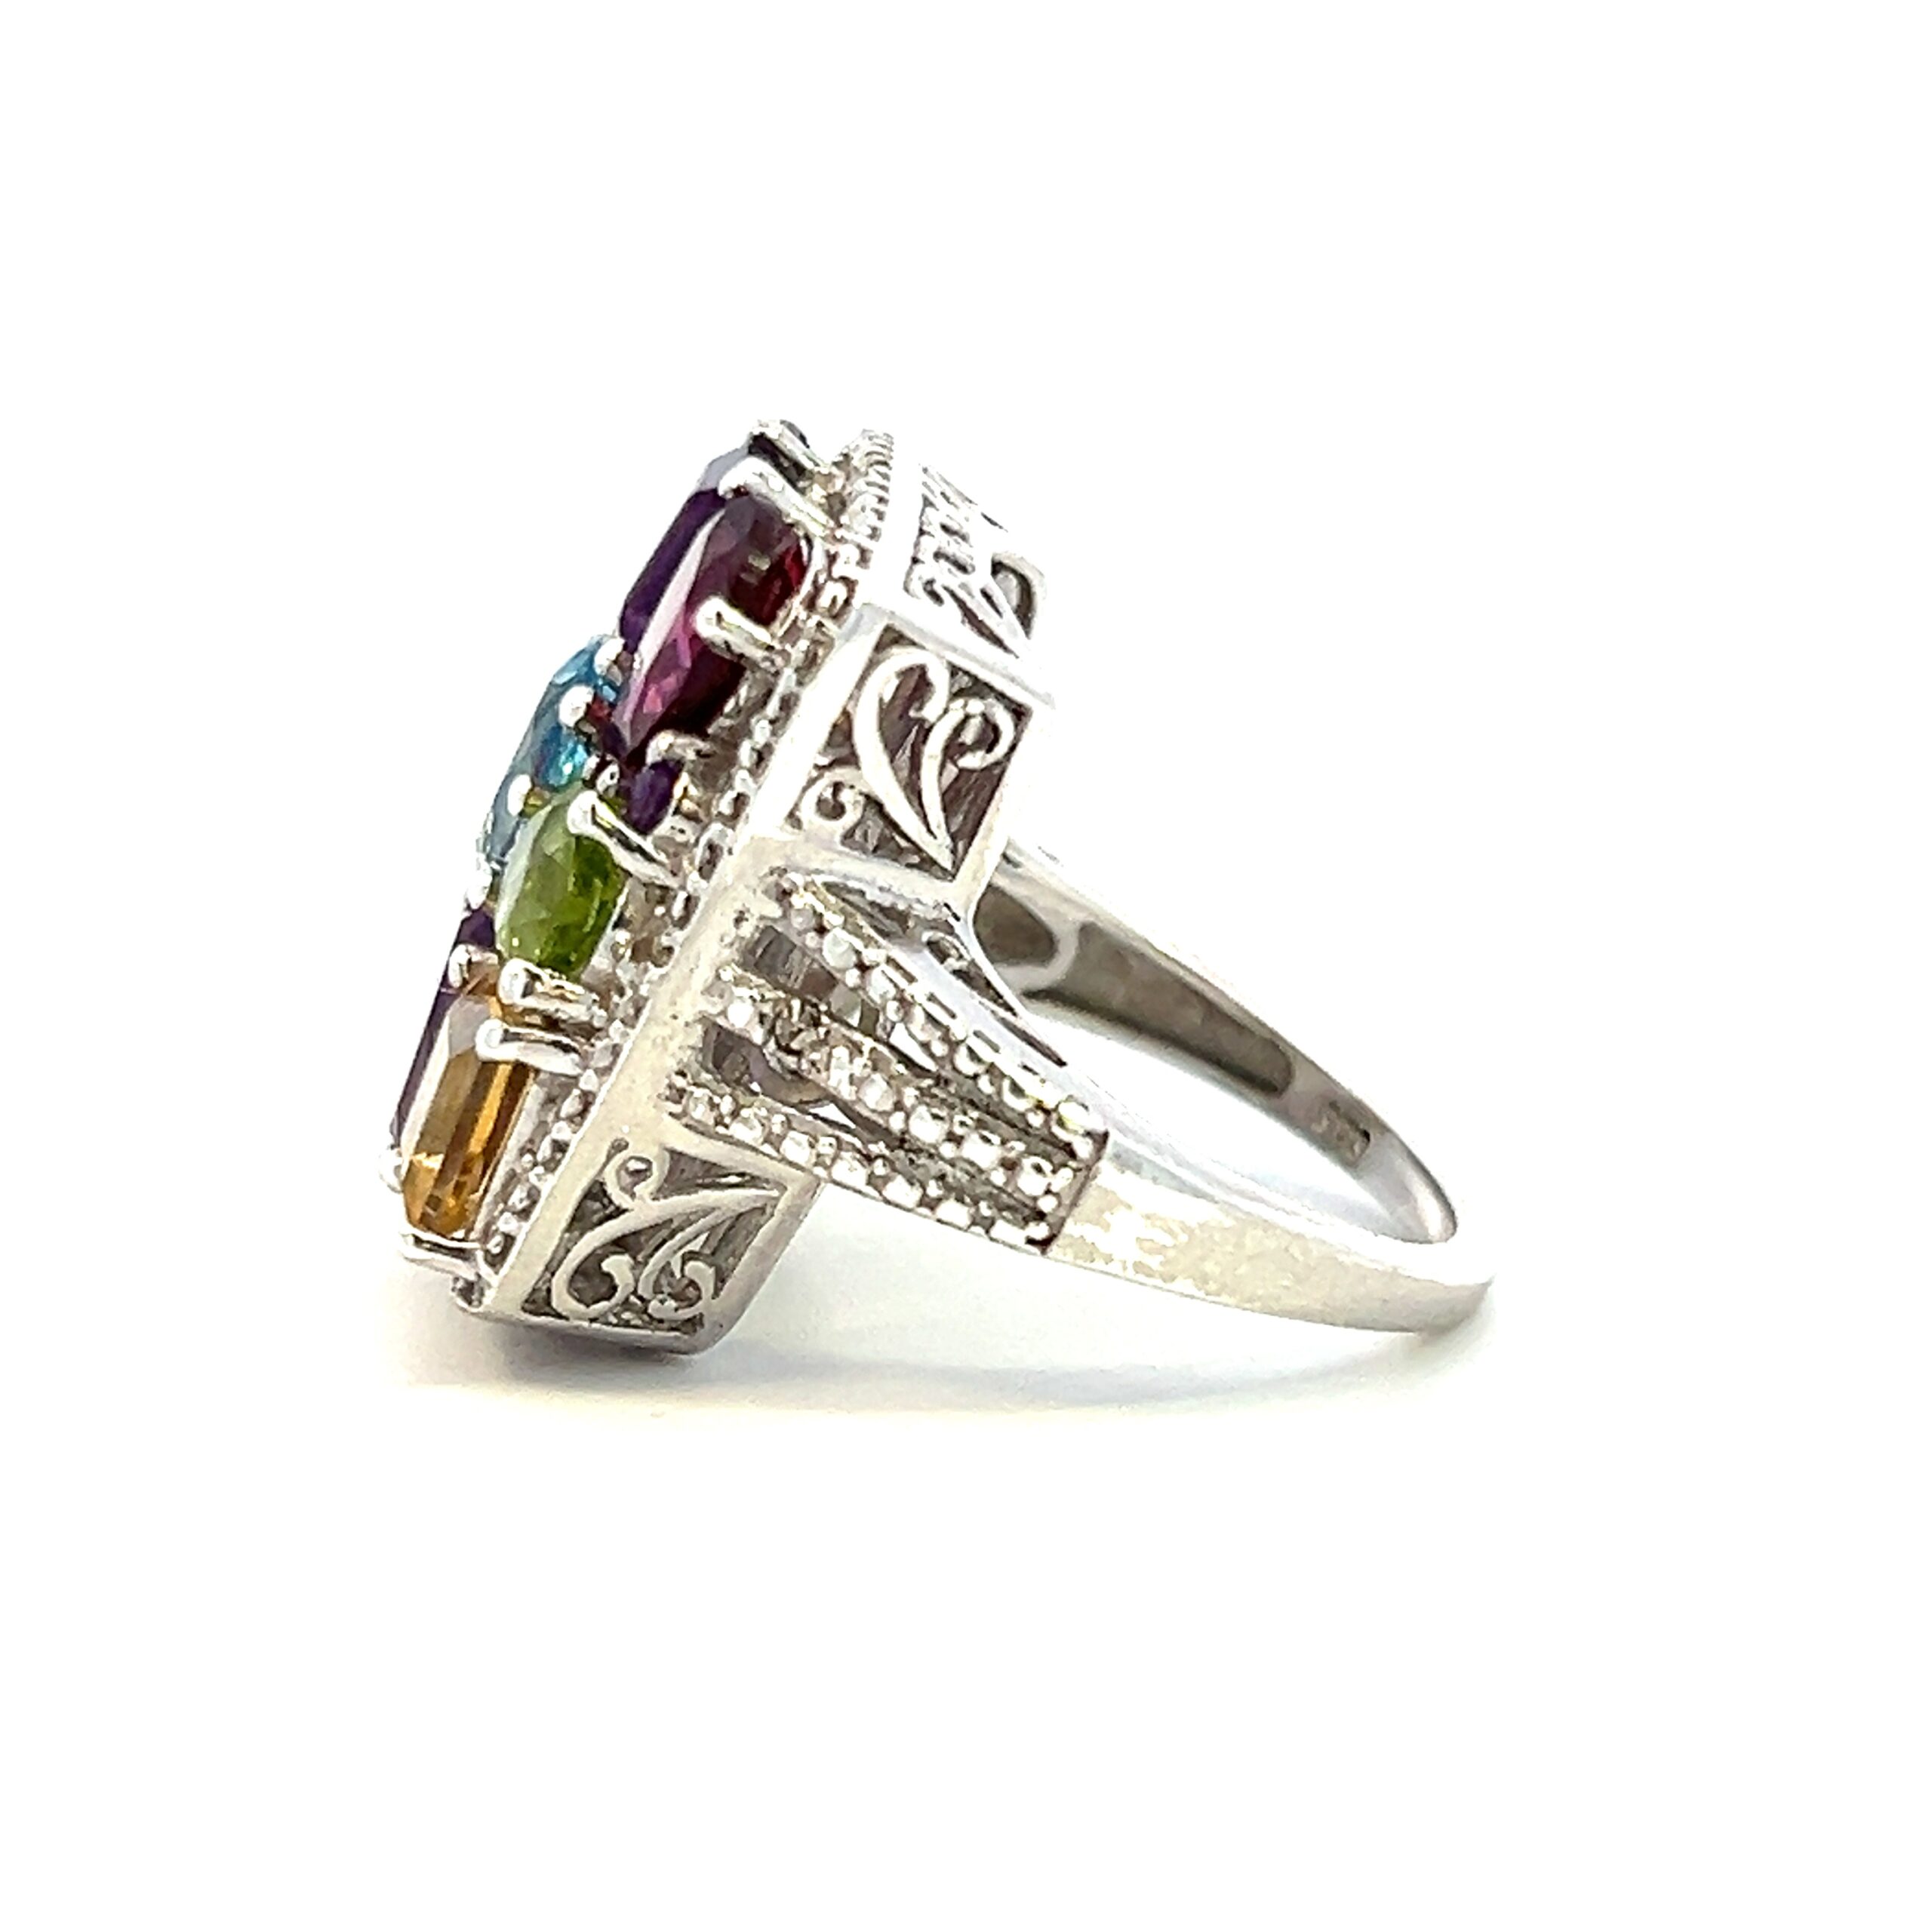 The Estate Quilted Rainbow Gemstone Ring is crafted from sterling silver and features a square top set with various gemstones in a variety of colors and shapes resembling a patchwork quilt.